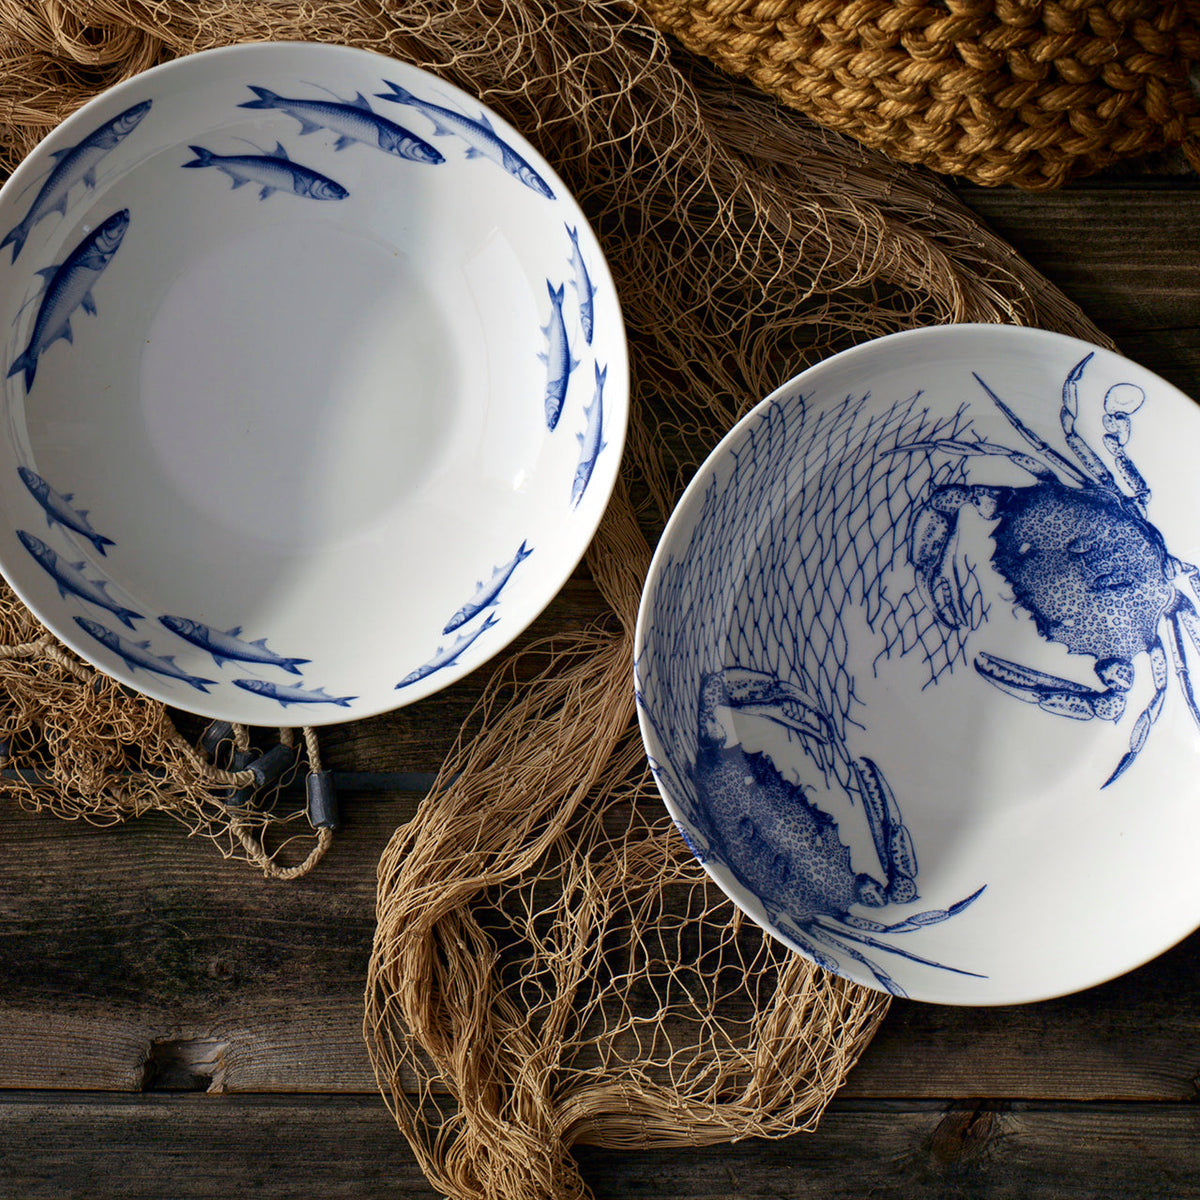 Two School of Fish Wide Serving Bowls by Caskata Artisanal Home on a wooden table.